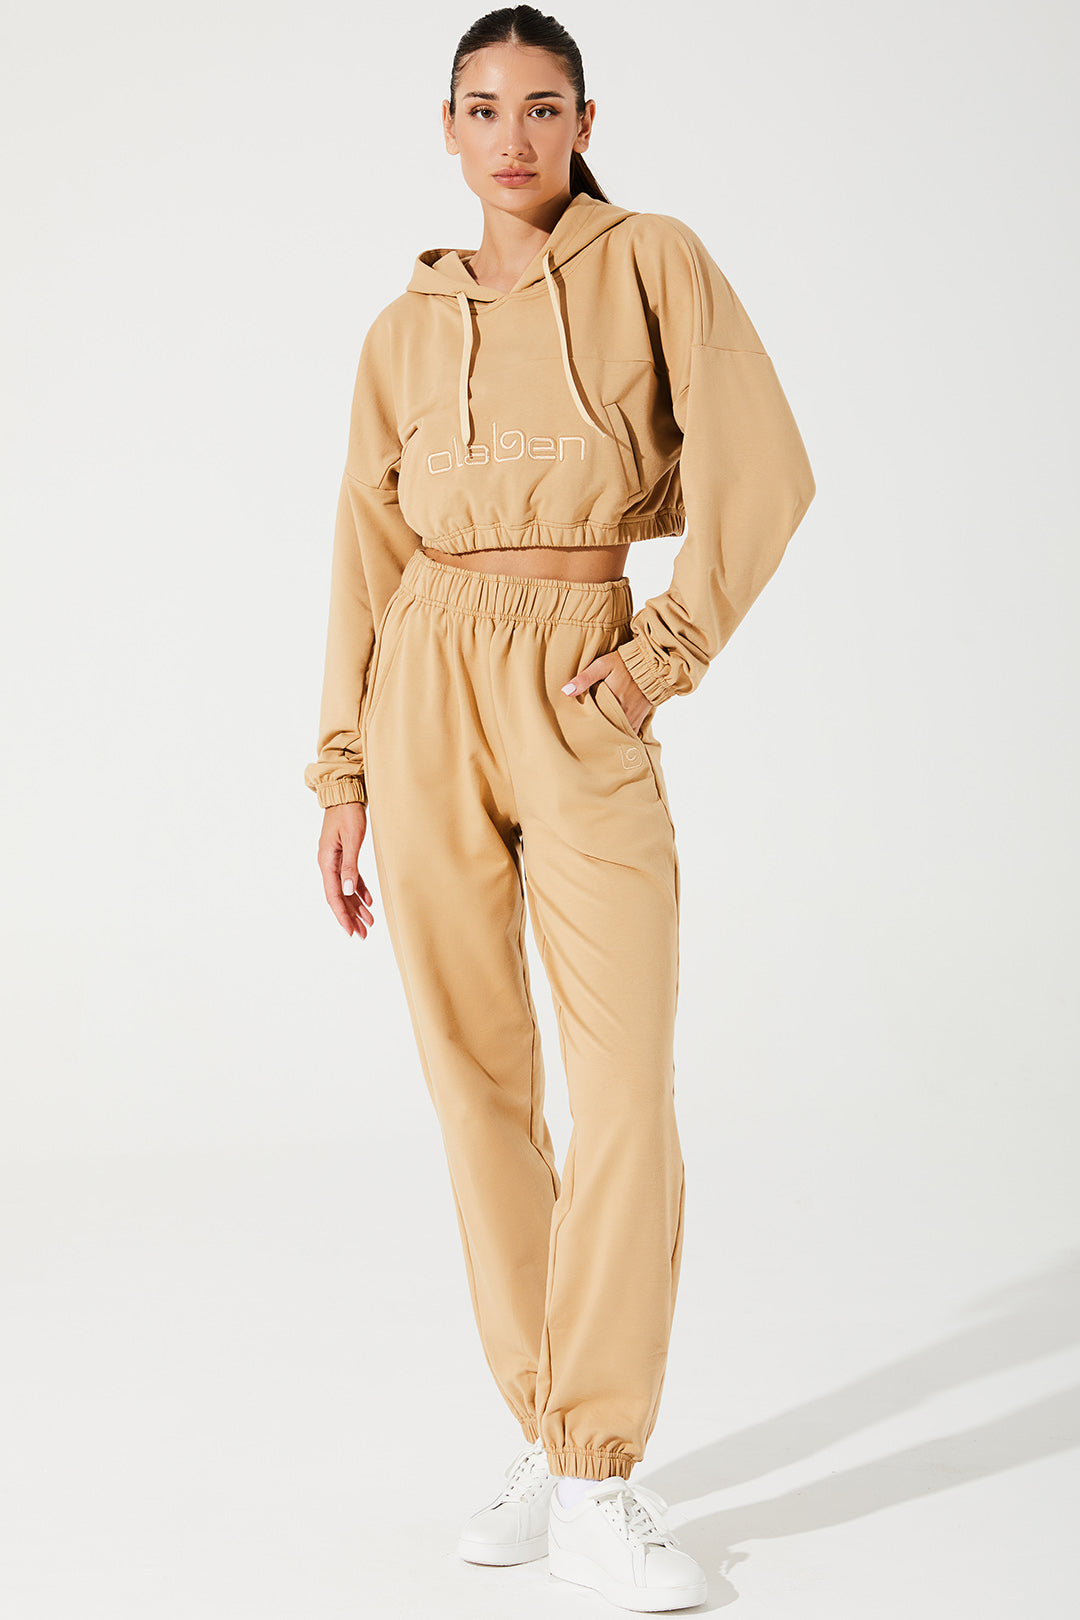 Janet wearing cappuccino beige women's sweatpants, a comfortable and stylish choice for any occasion.